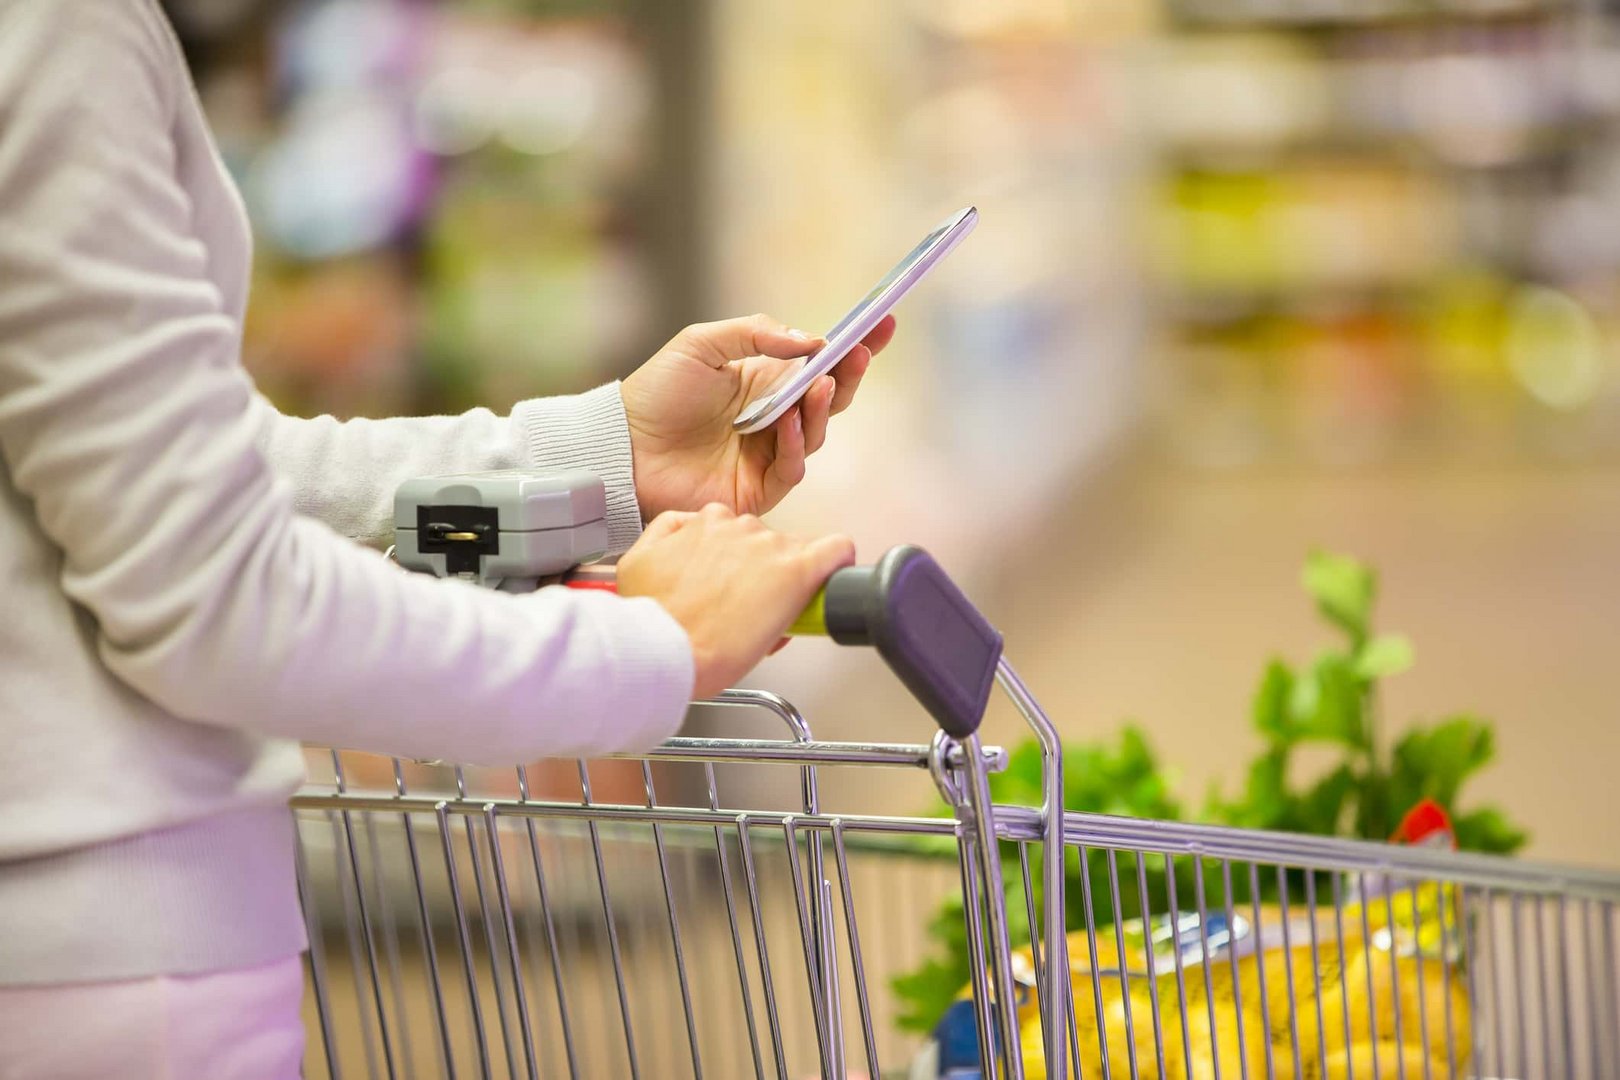 image Majority of Cypriot shoppers visit multiple supermarkets monthly, study reveals